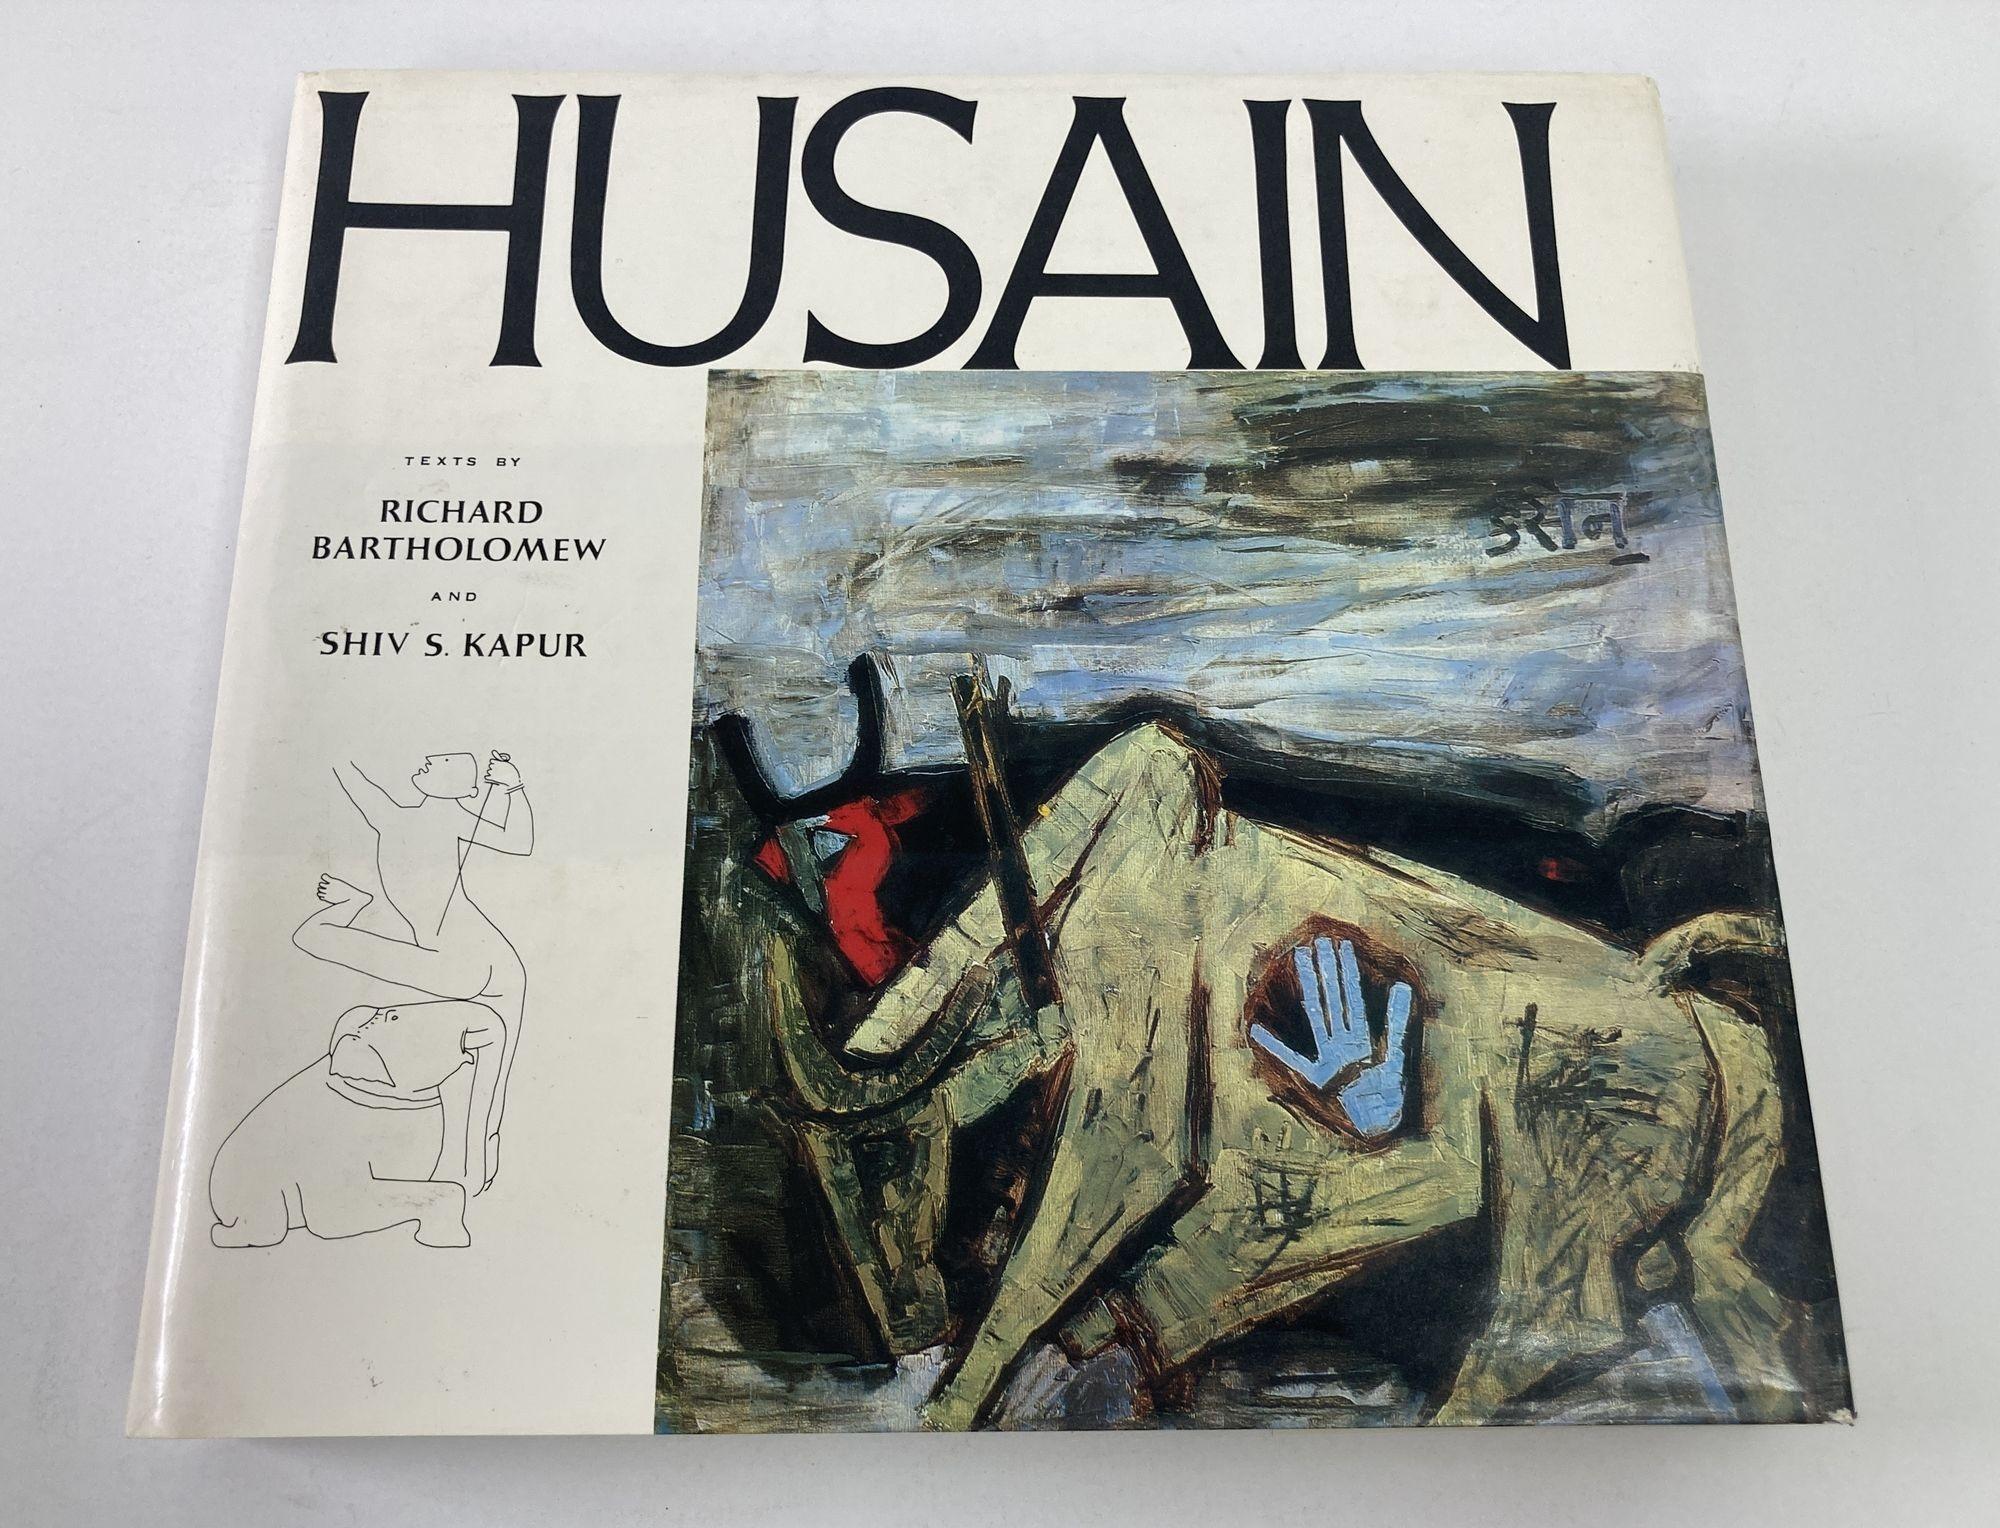 Husain by Maqbul Fida Husain, Richard Bartholomew, Shiv S. Kapur · H. N. Abrams · hardback · 60 pages.
A terrific copy of one of the best monographs on this important Indian artist.
Illustrated in color and black & white. 60 pages of text and 192